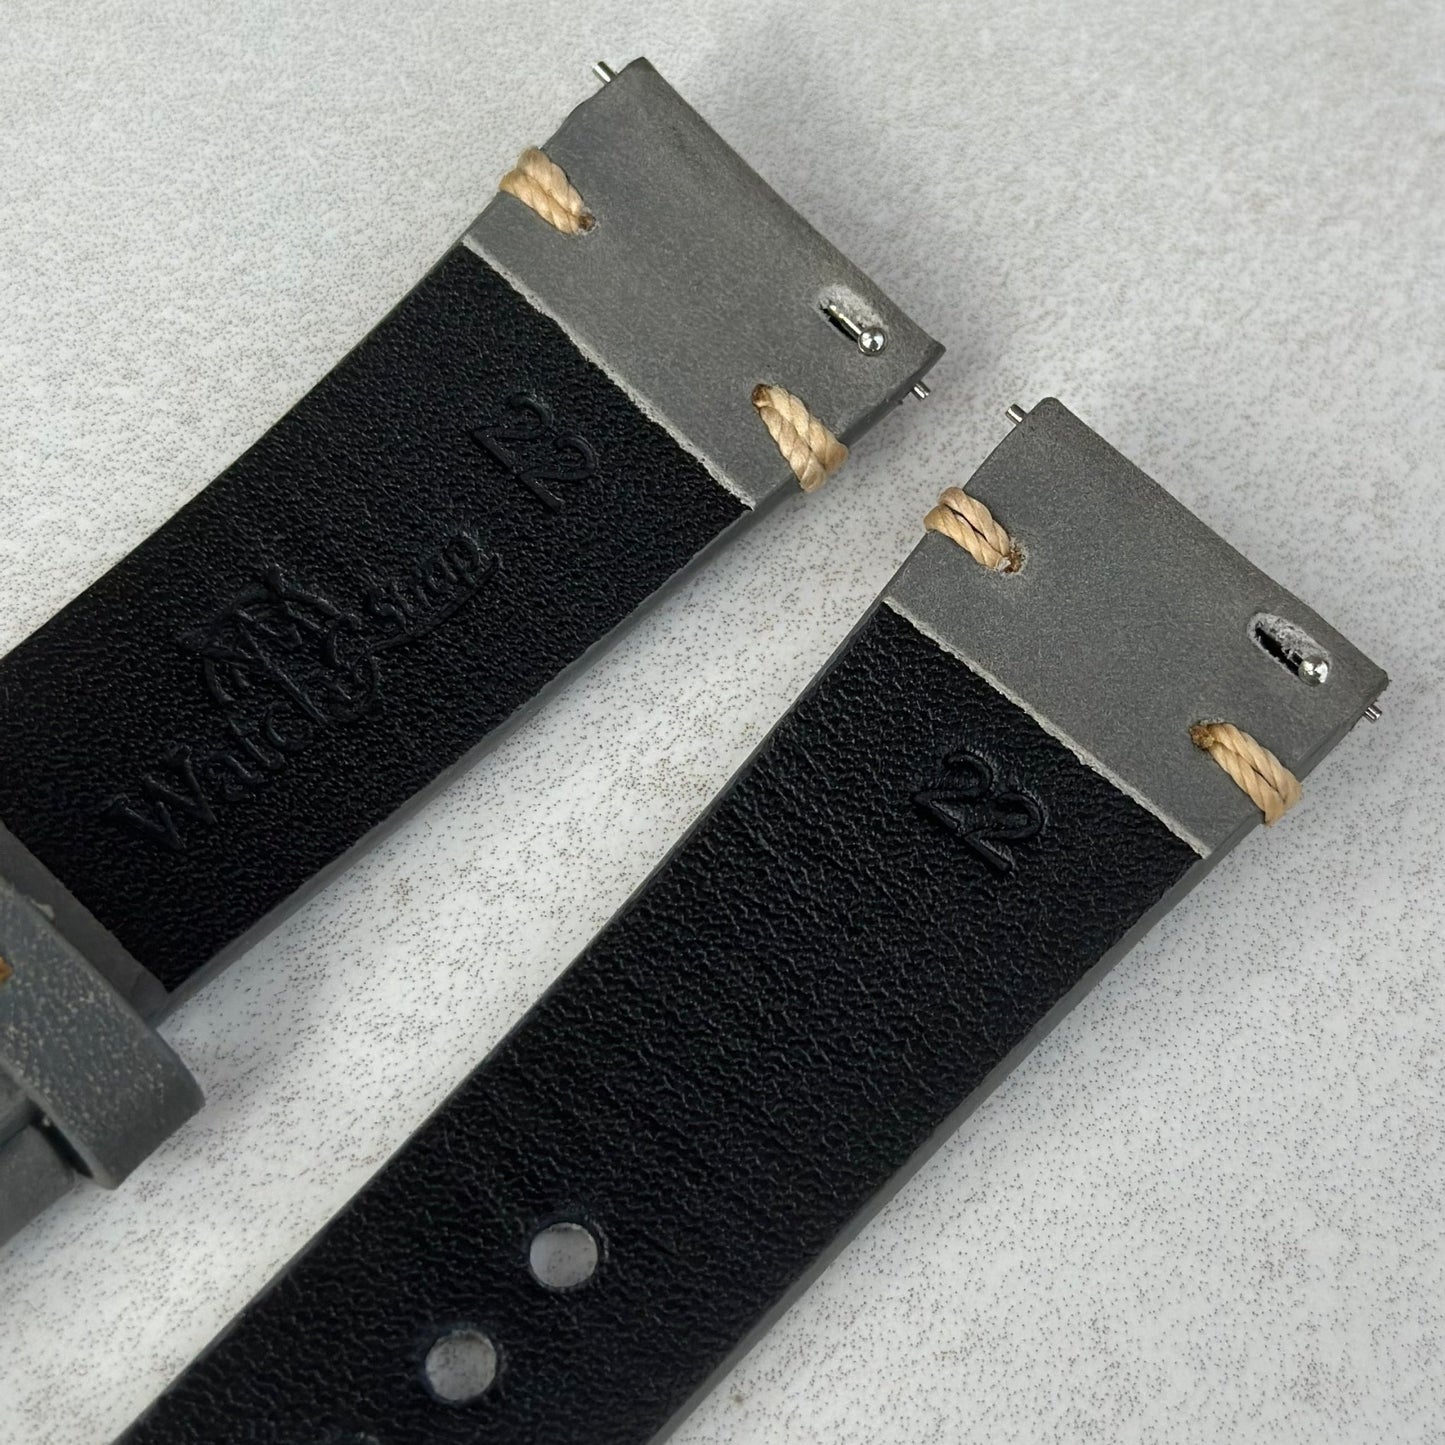 Quick release pins on the Madrid horse leather watch strap. Making it easy to switch between watch straps.